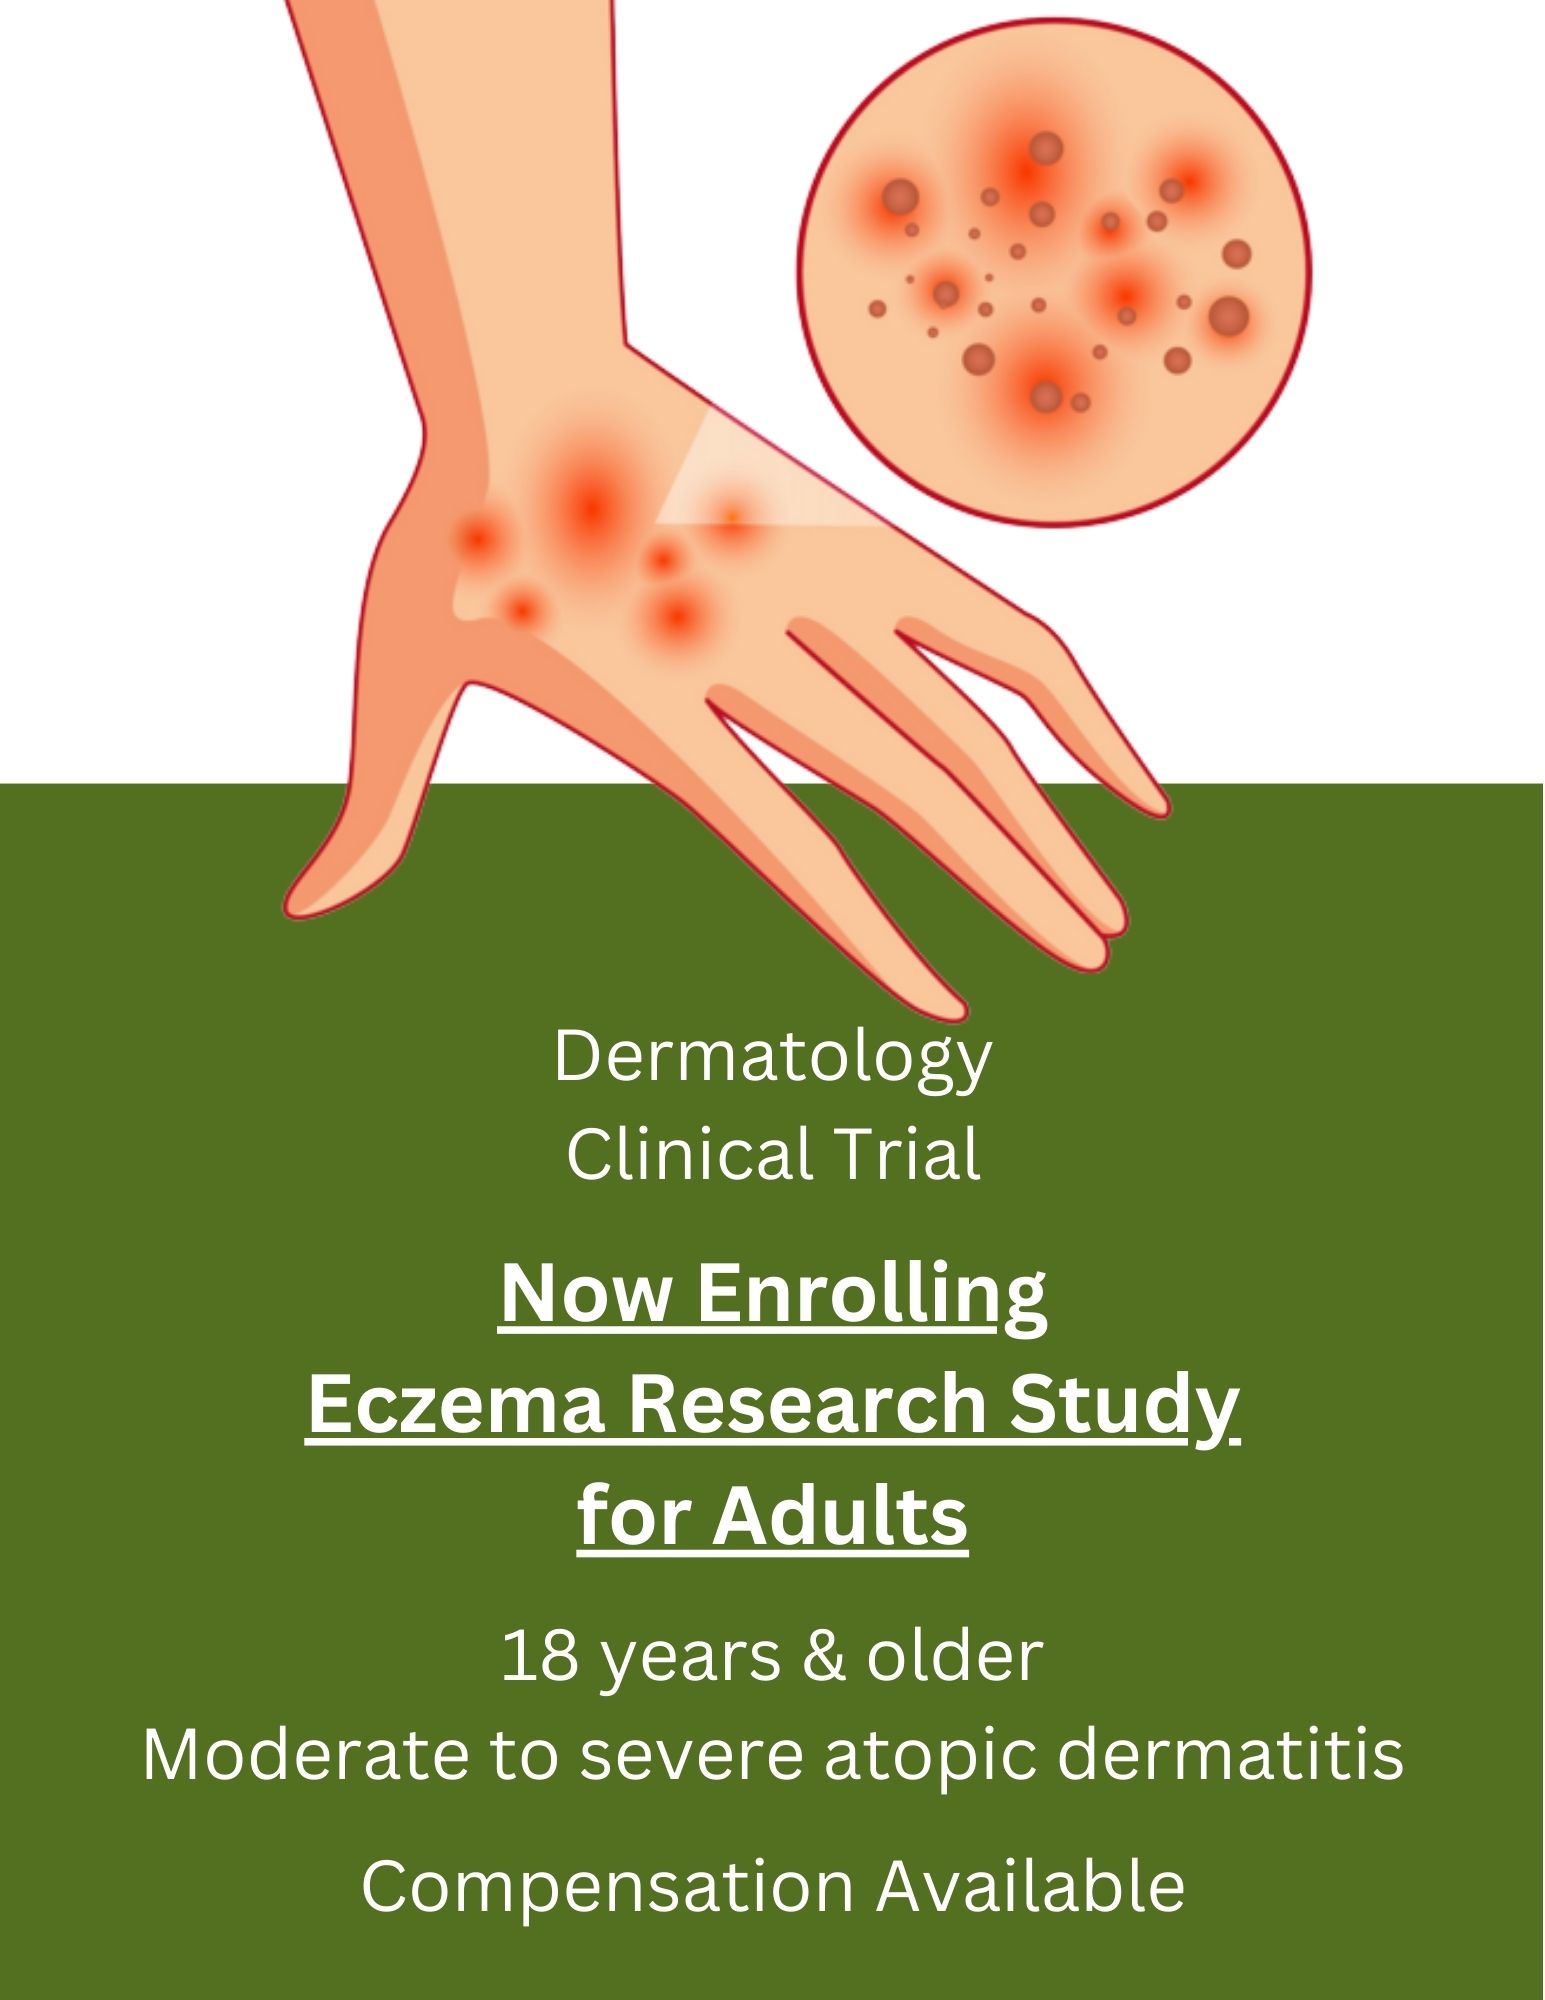 Eczema Research Study for Adults